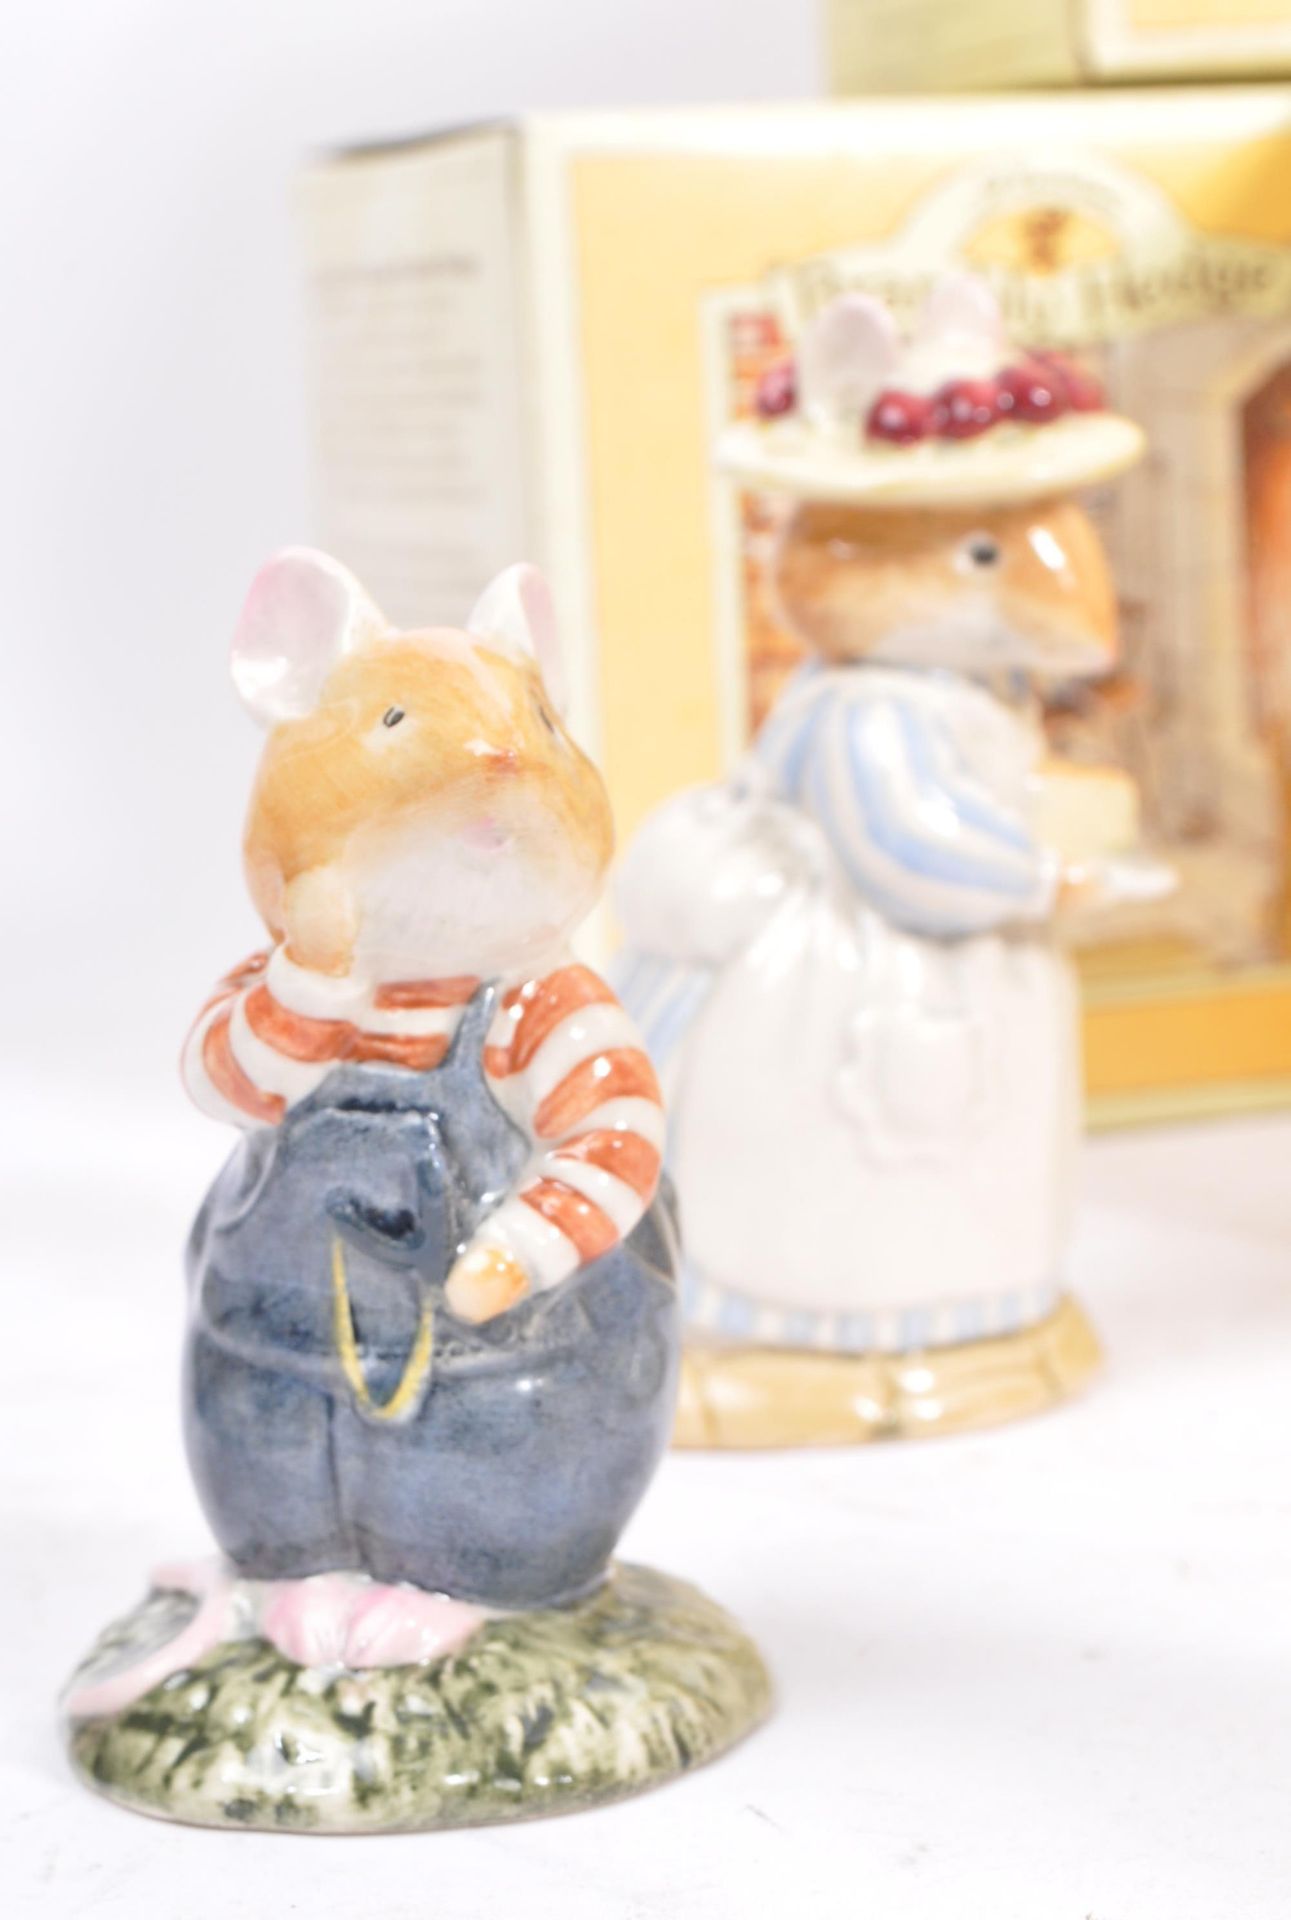 ELEVEN ROYAL DOULTON 'BRAMBLY HEDGE' CHINA MICE FIGURINES - Image 5 of 12